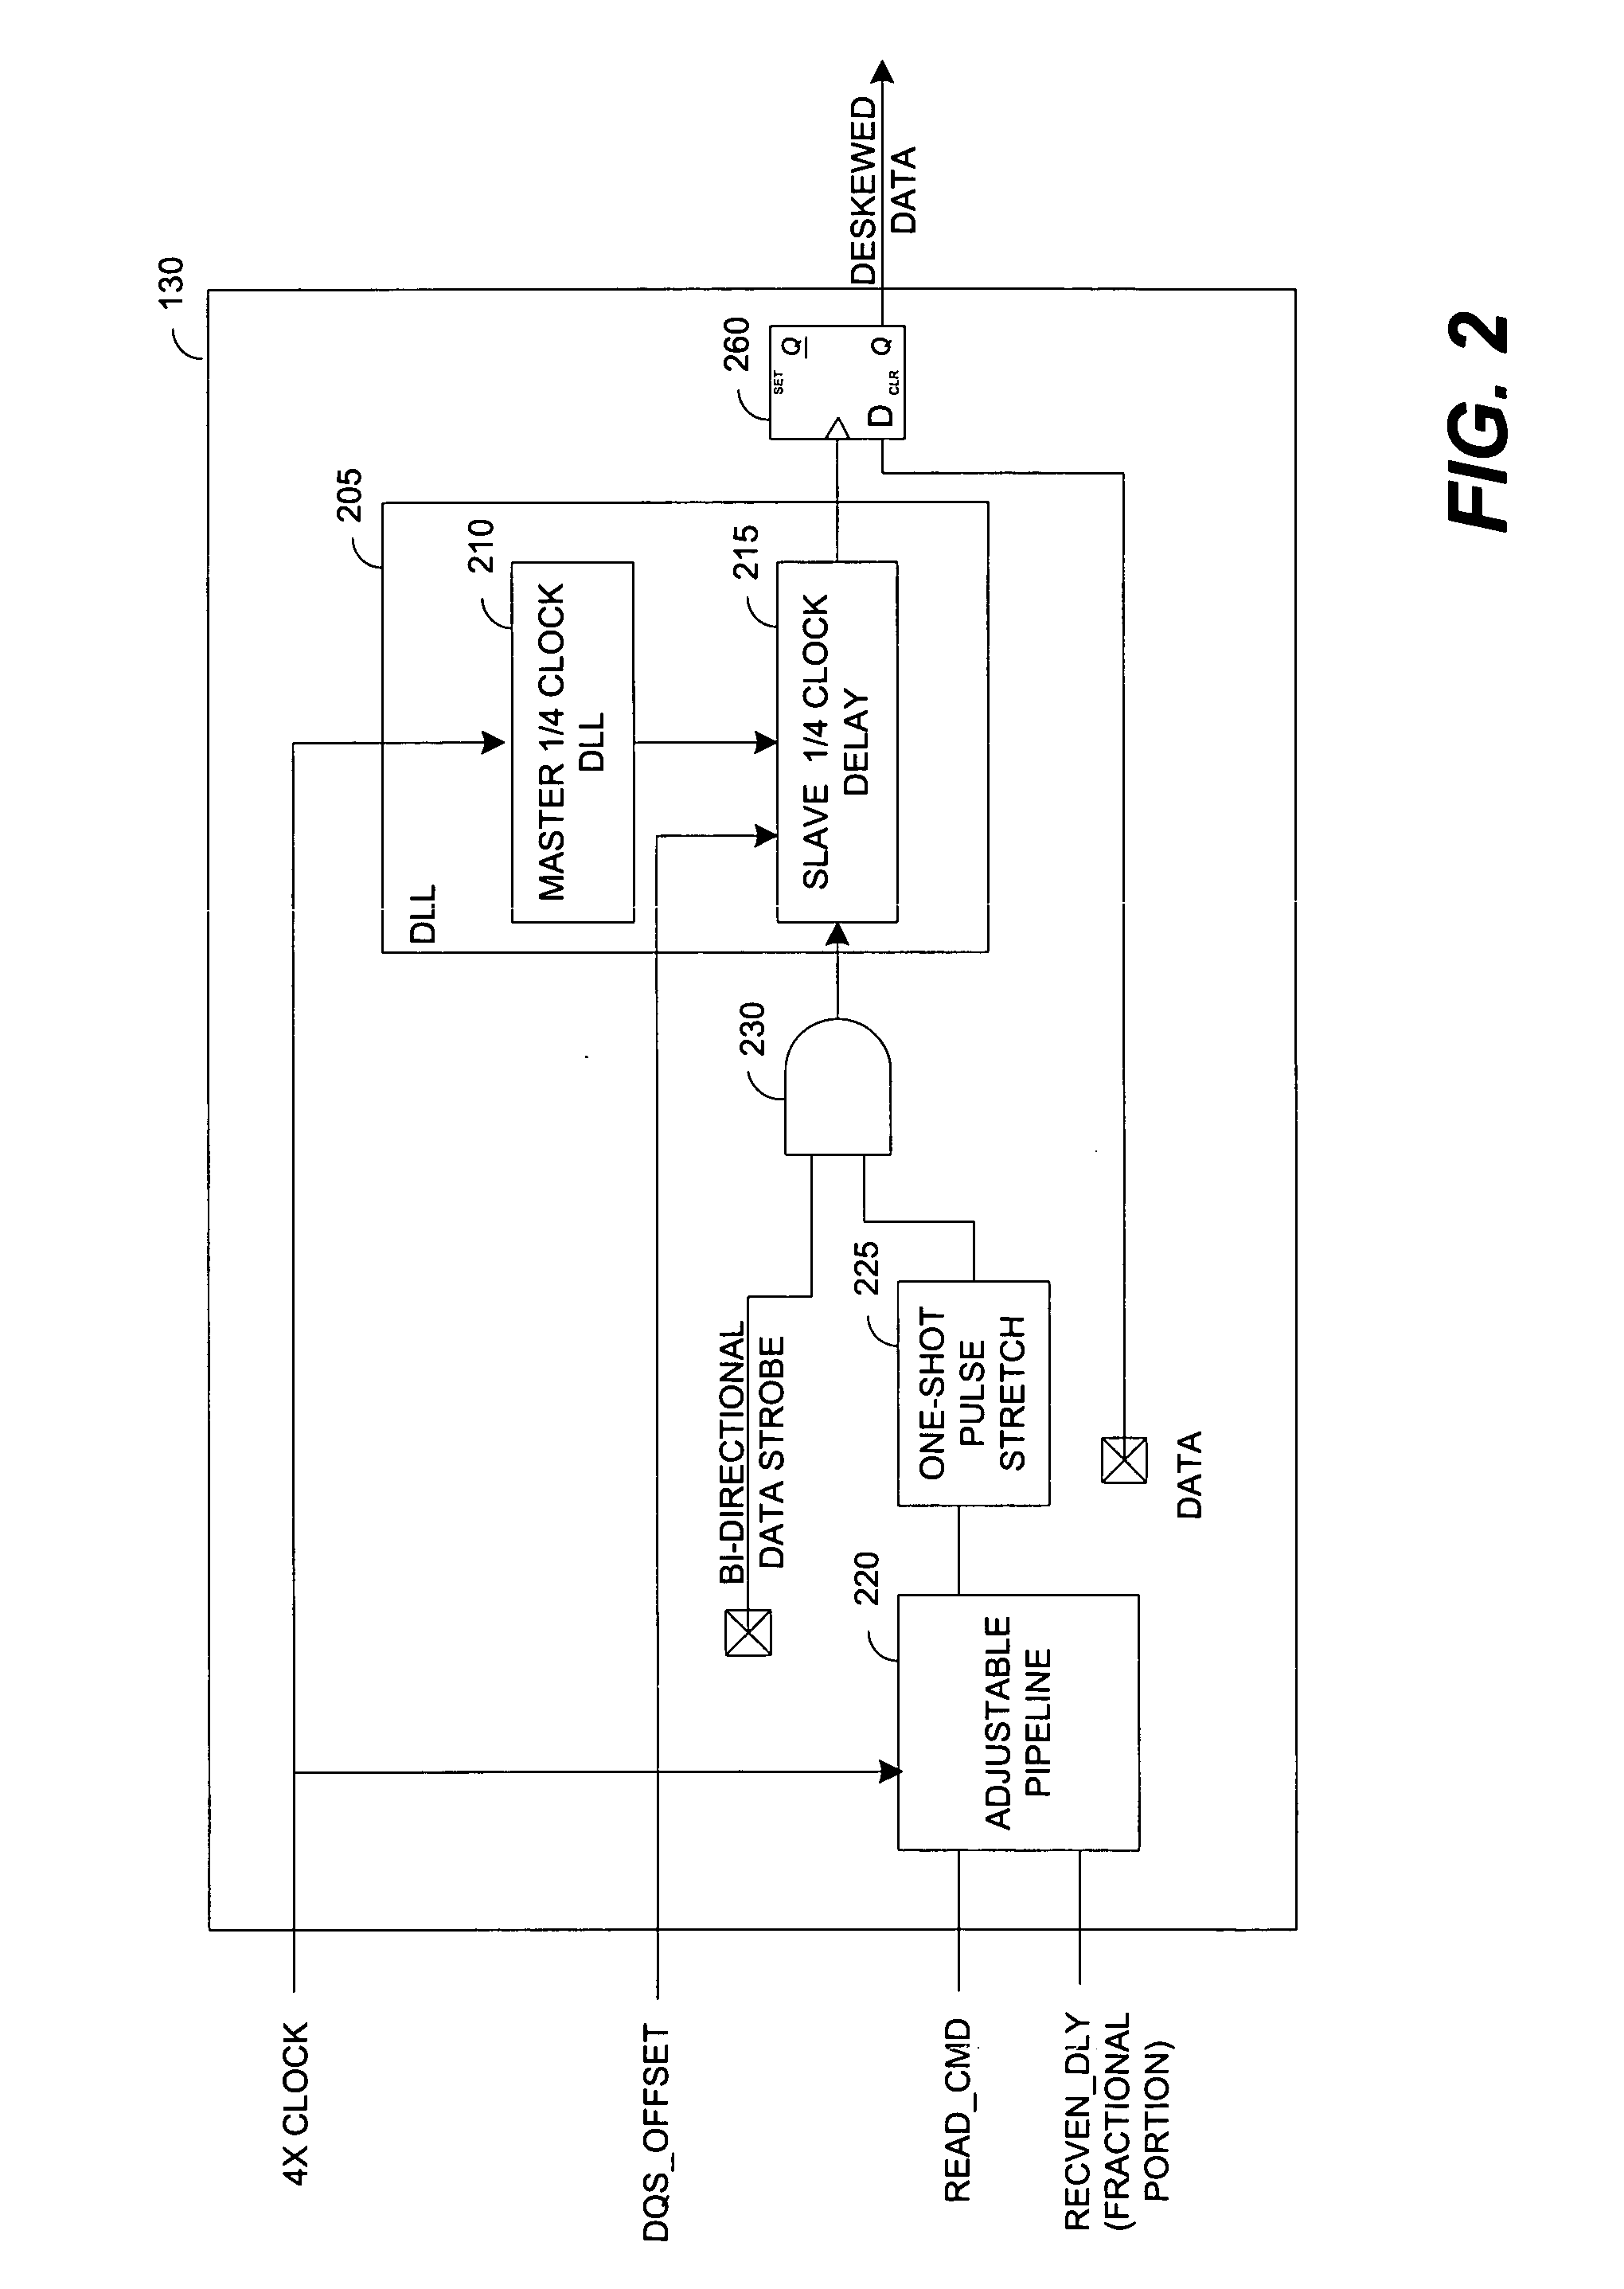 System and method for dynamic rank specific timing adjustments for double data rate (DDR) components